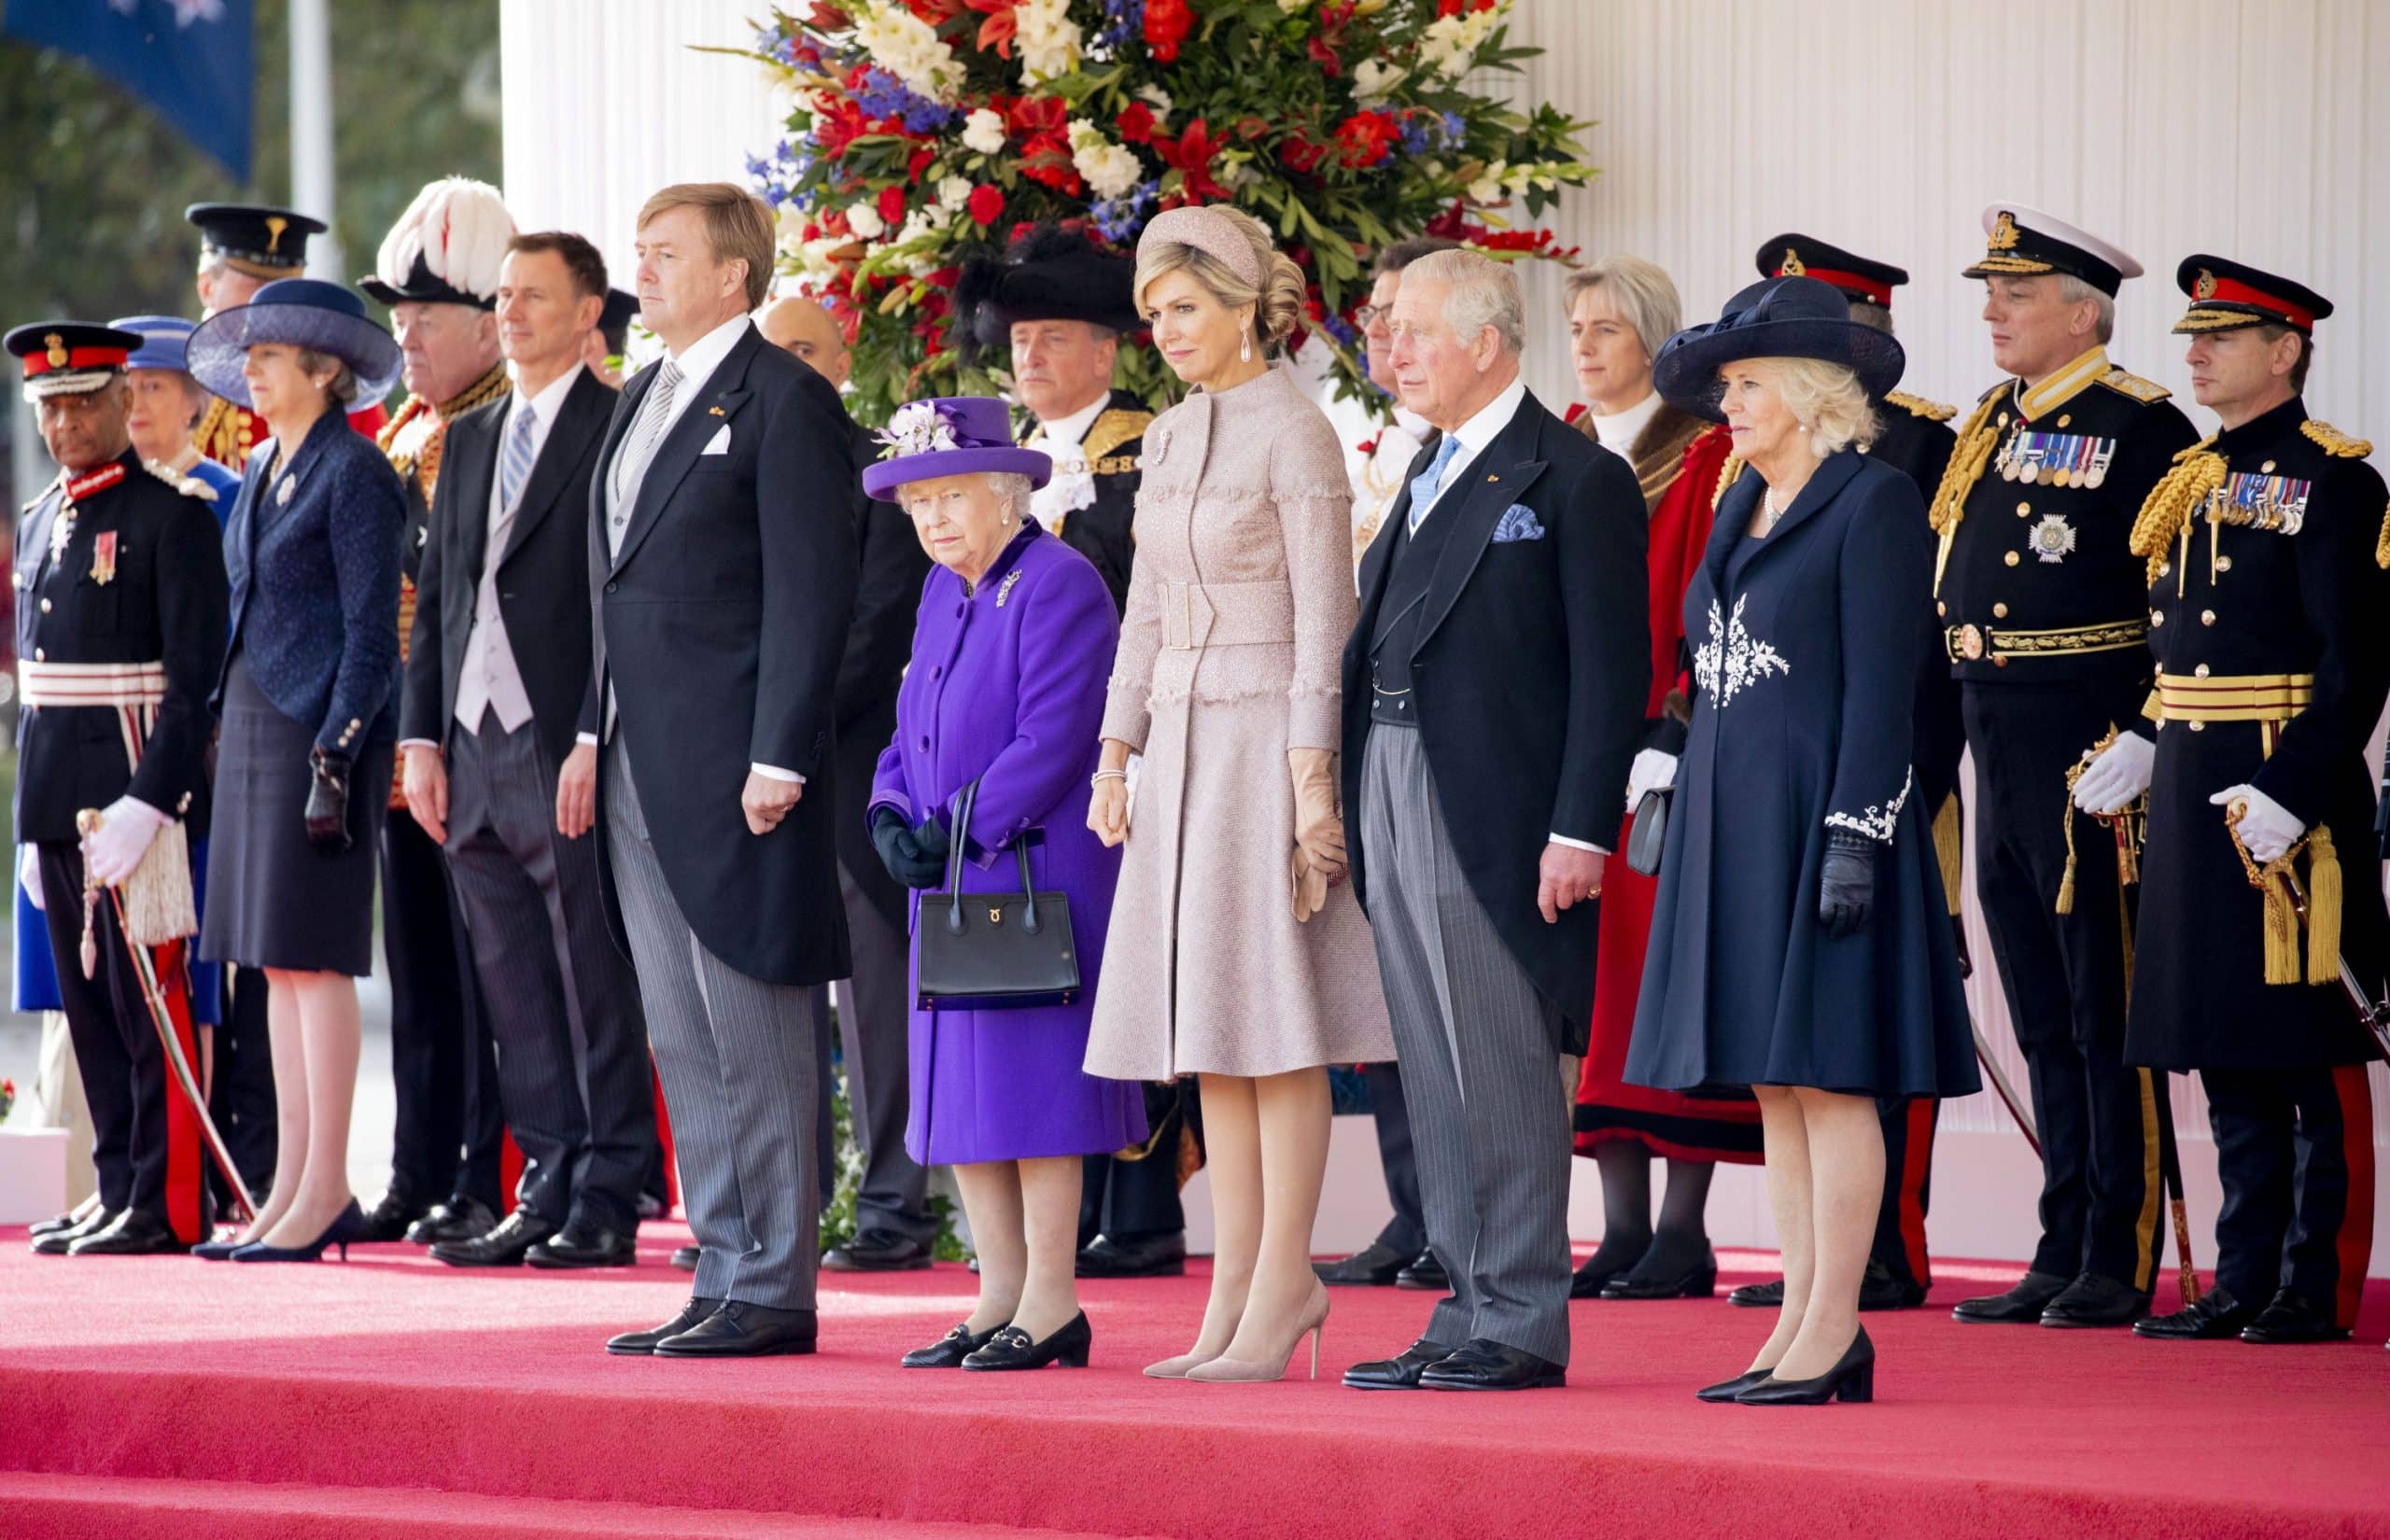 With the ‘morning dress’ dress code, Máxima can leave her jeans at home